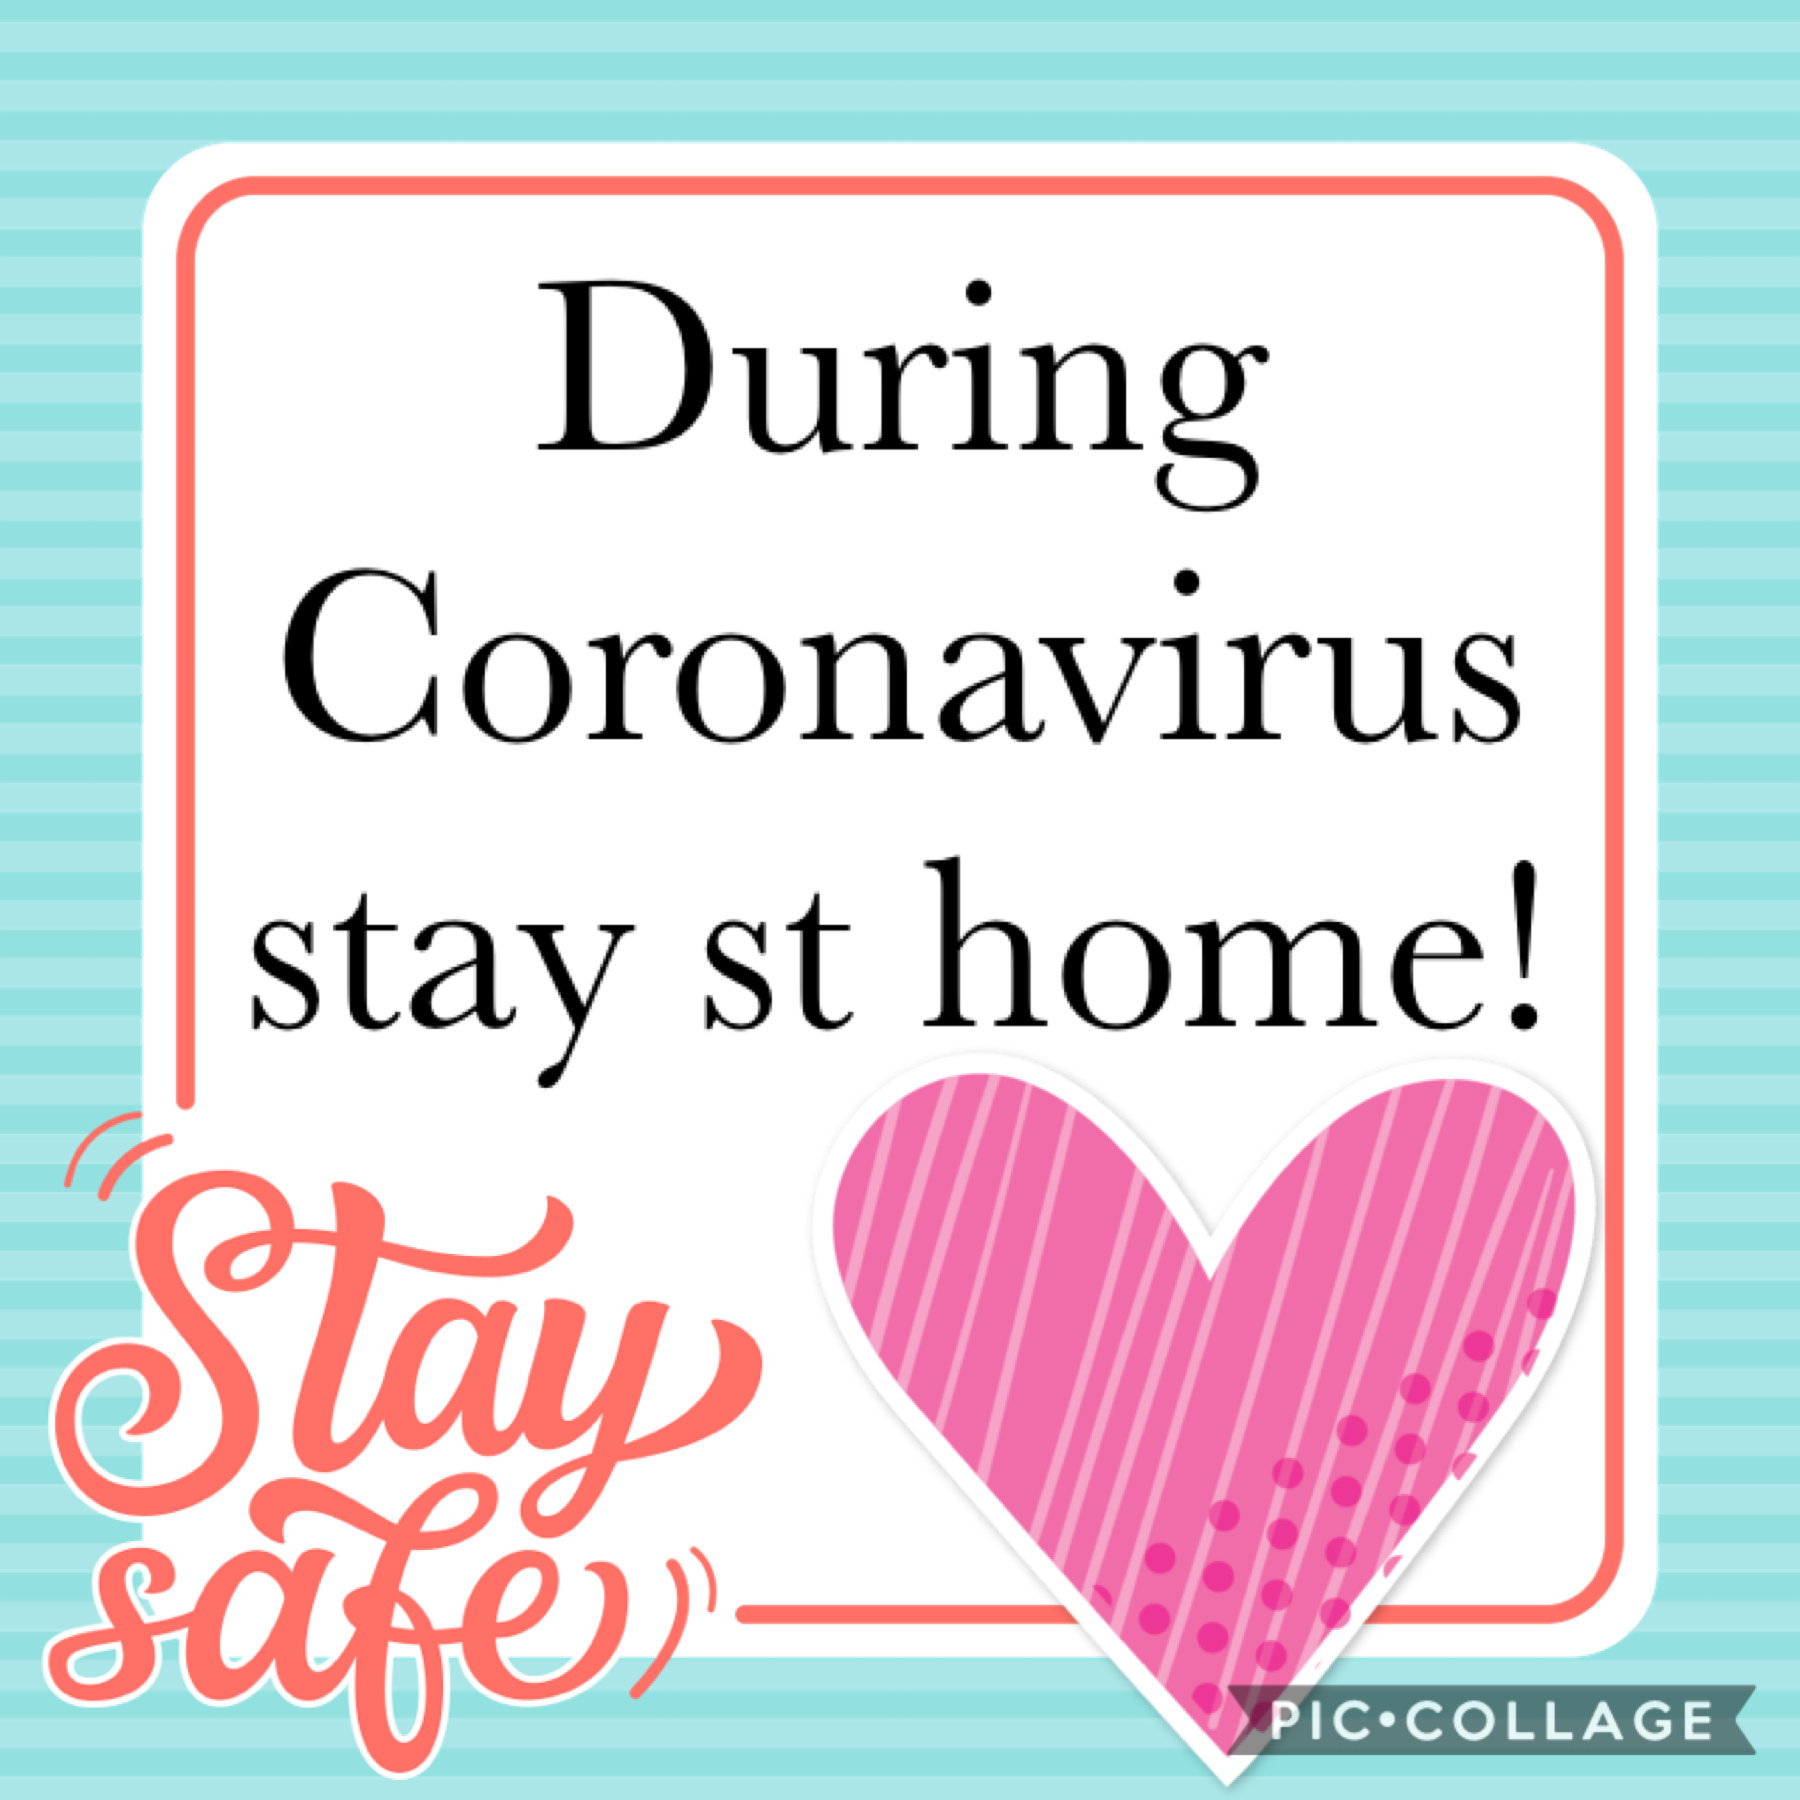 This is something that tells you to stay at home because because if you go out you may get the coronavirus because people that got the coronavirus spread to you.